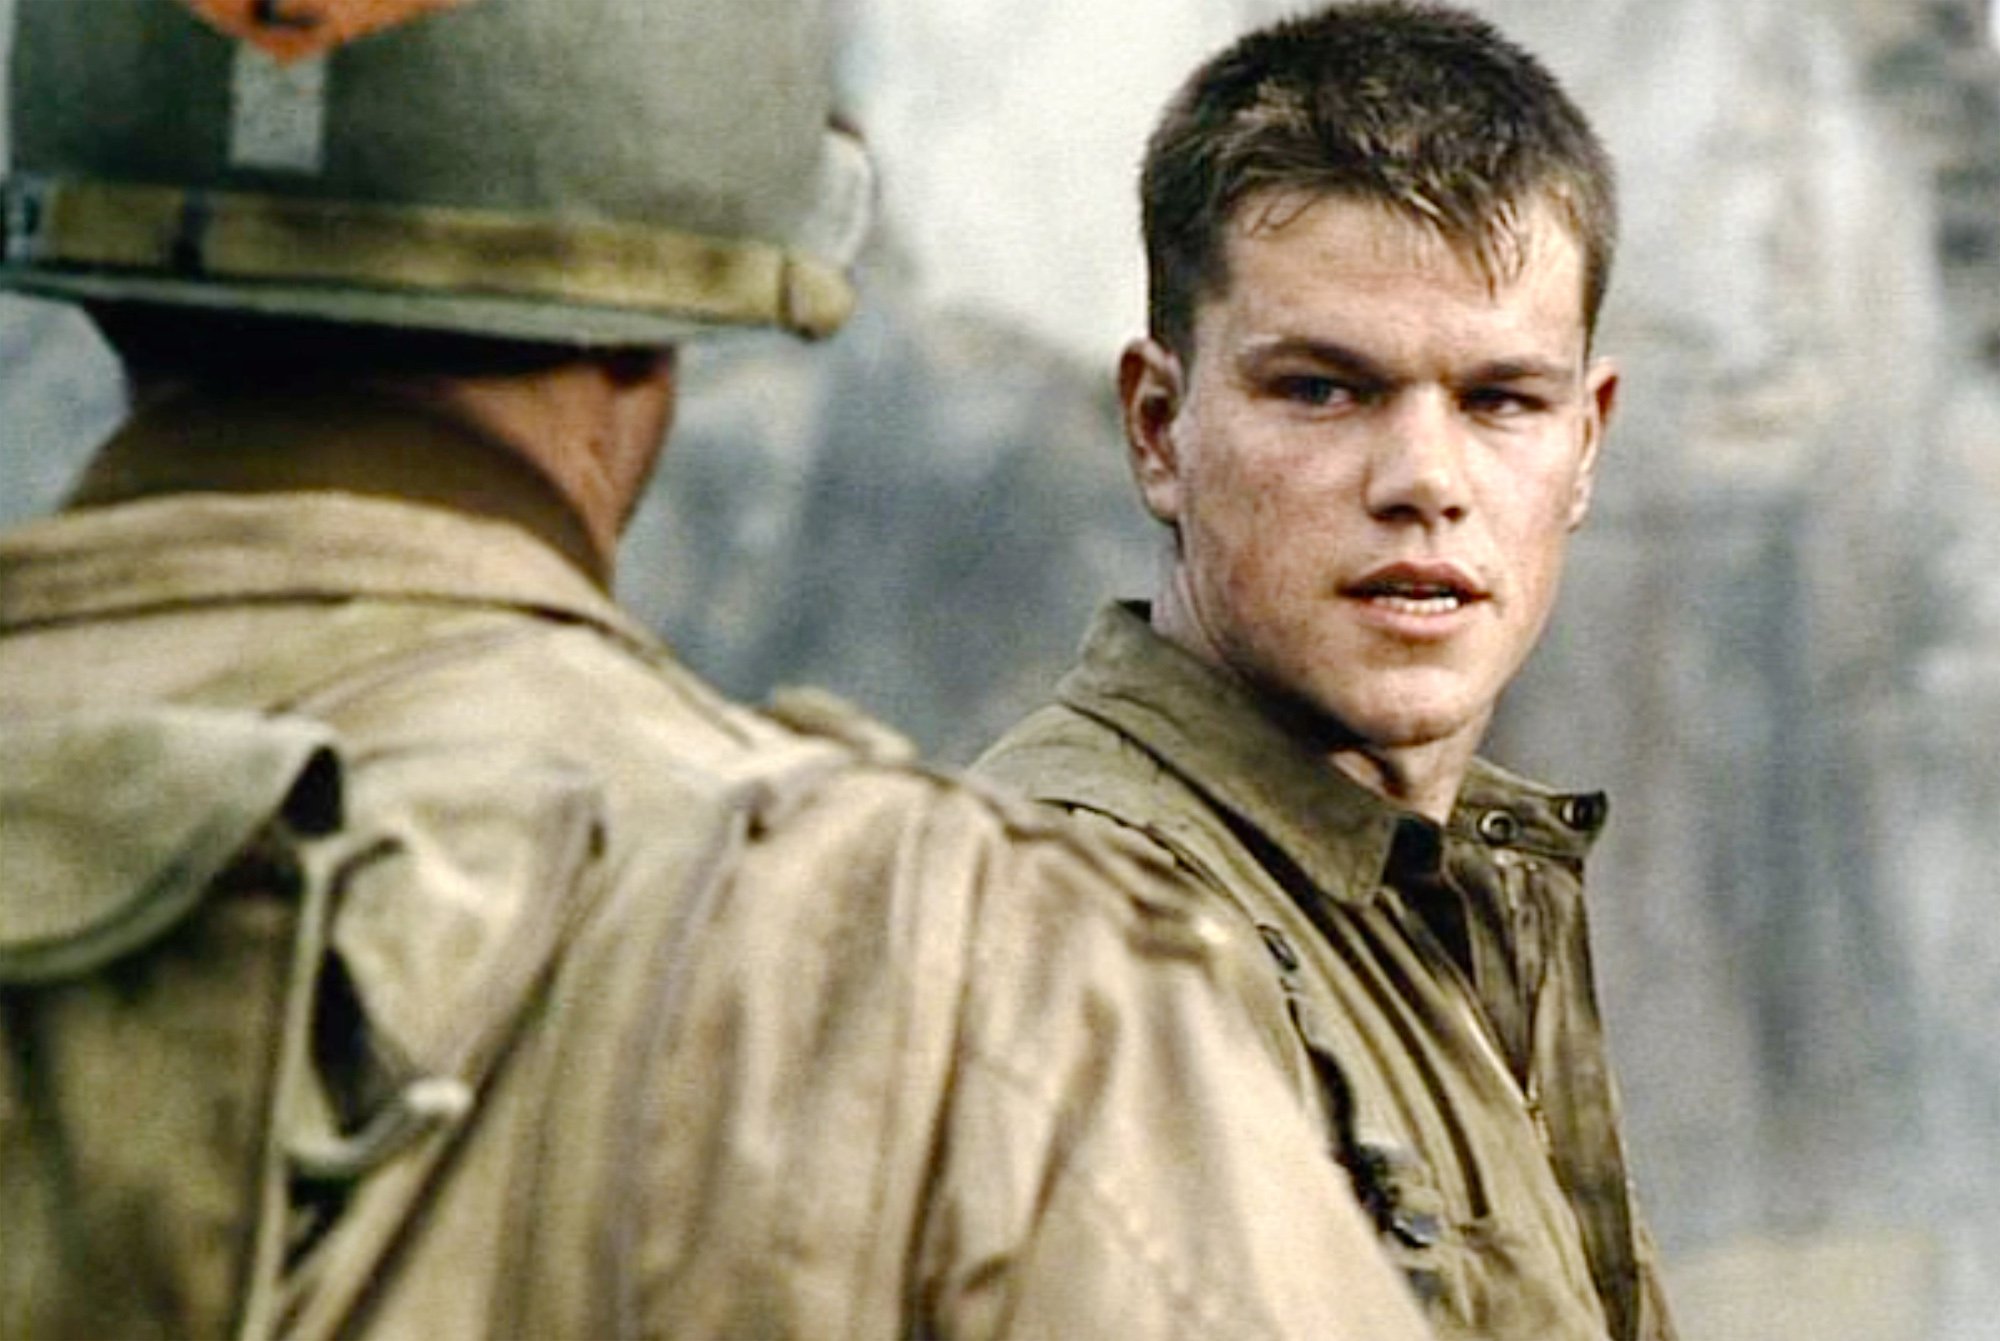 The movie "Saving Private Ryan", directed by Steven Spielberg. Seen here from left, Tom Hanks (as Captain John H. Miller, back to camera) and Matt Damon (as Private James Francis Ryan, of the 101st Airborne). 